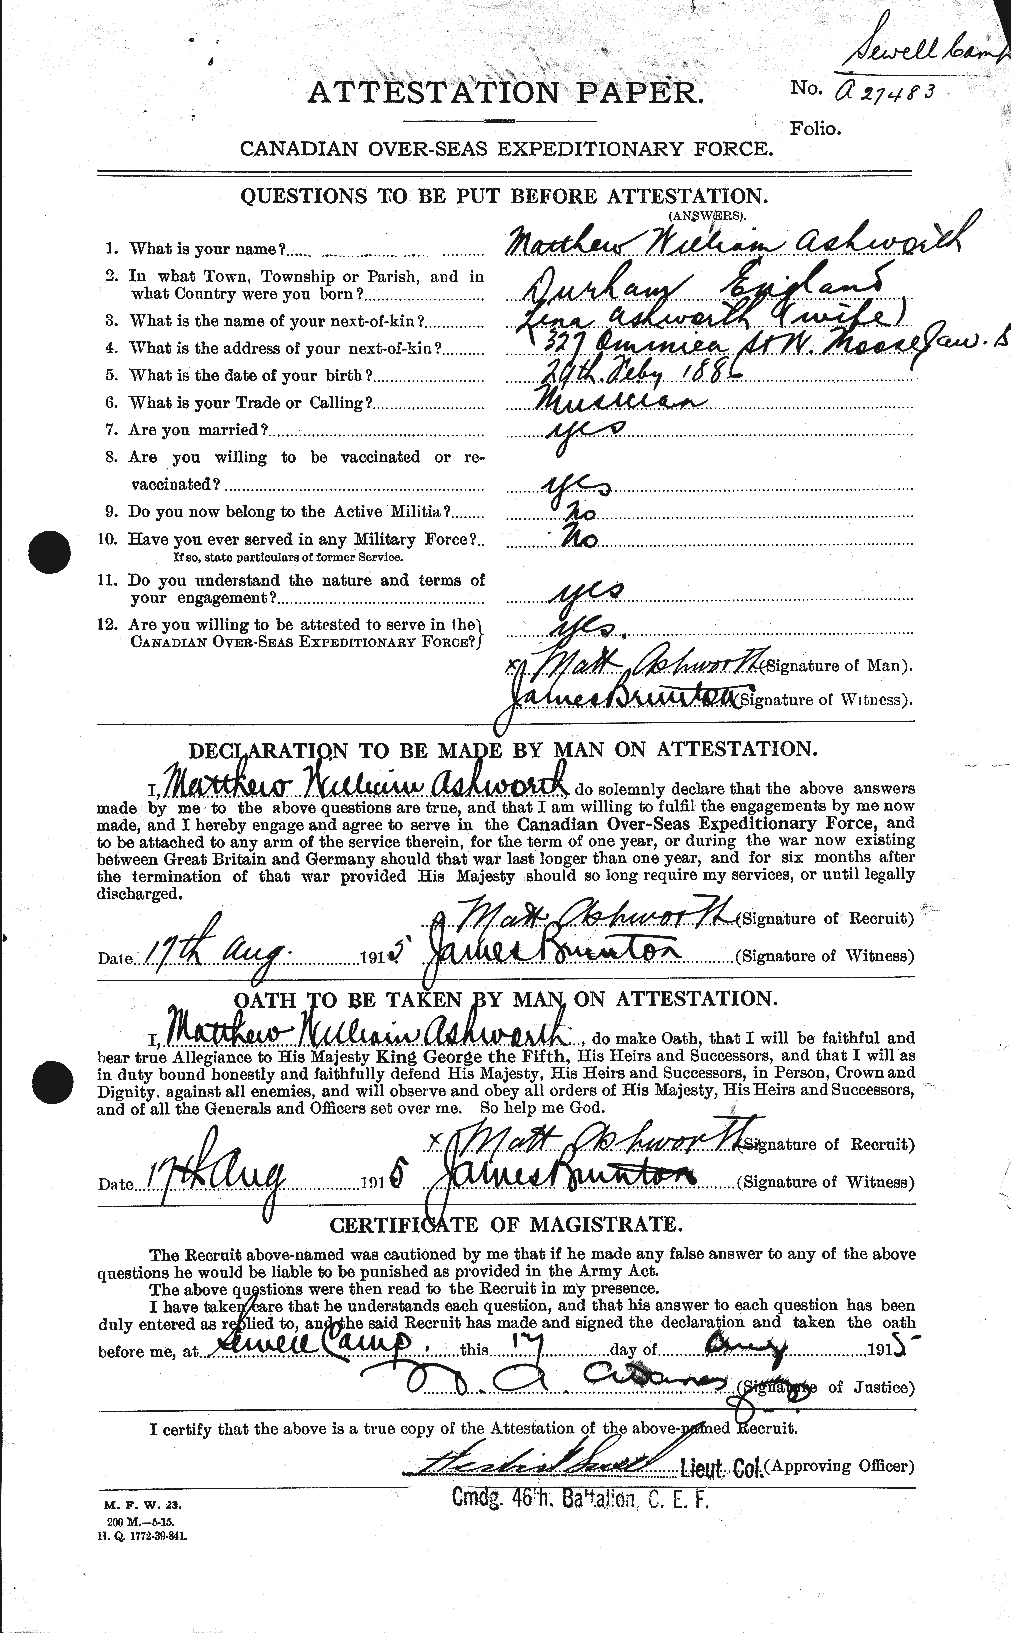 Personnel Records of the First World War - CEF 223712a